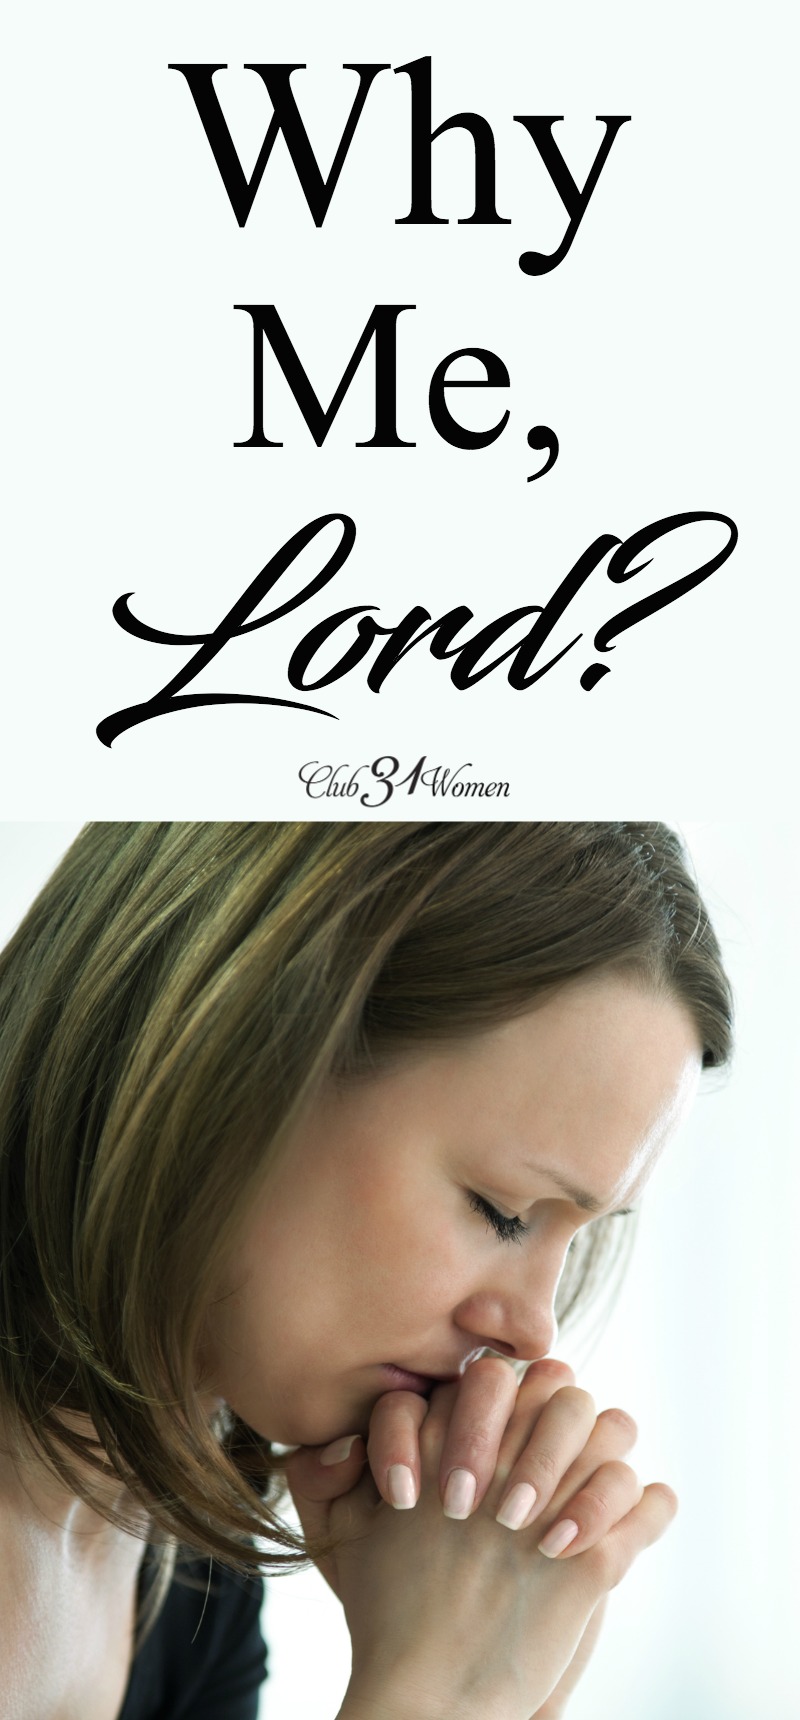 We know that sometimes life can be overwhelmingly hard and so we cry out “why me, Lord?” But we aren’t the only ones who have felt this way. via @Club31Women